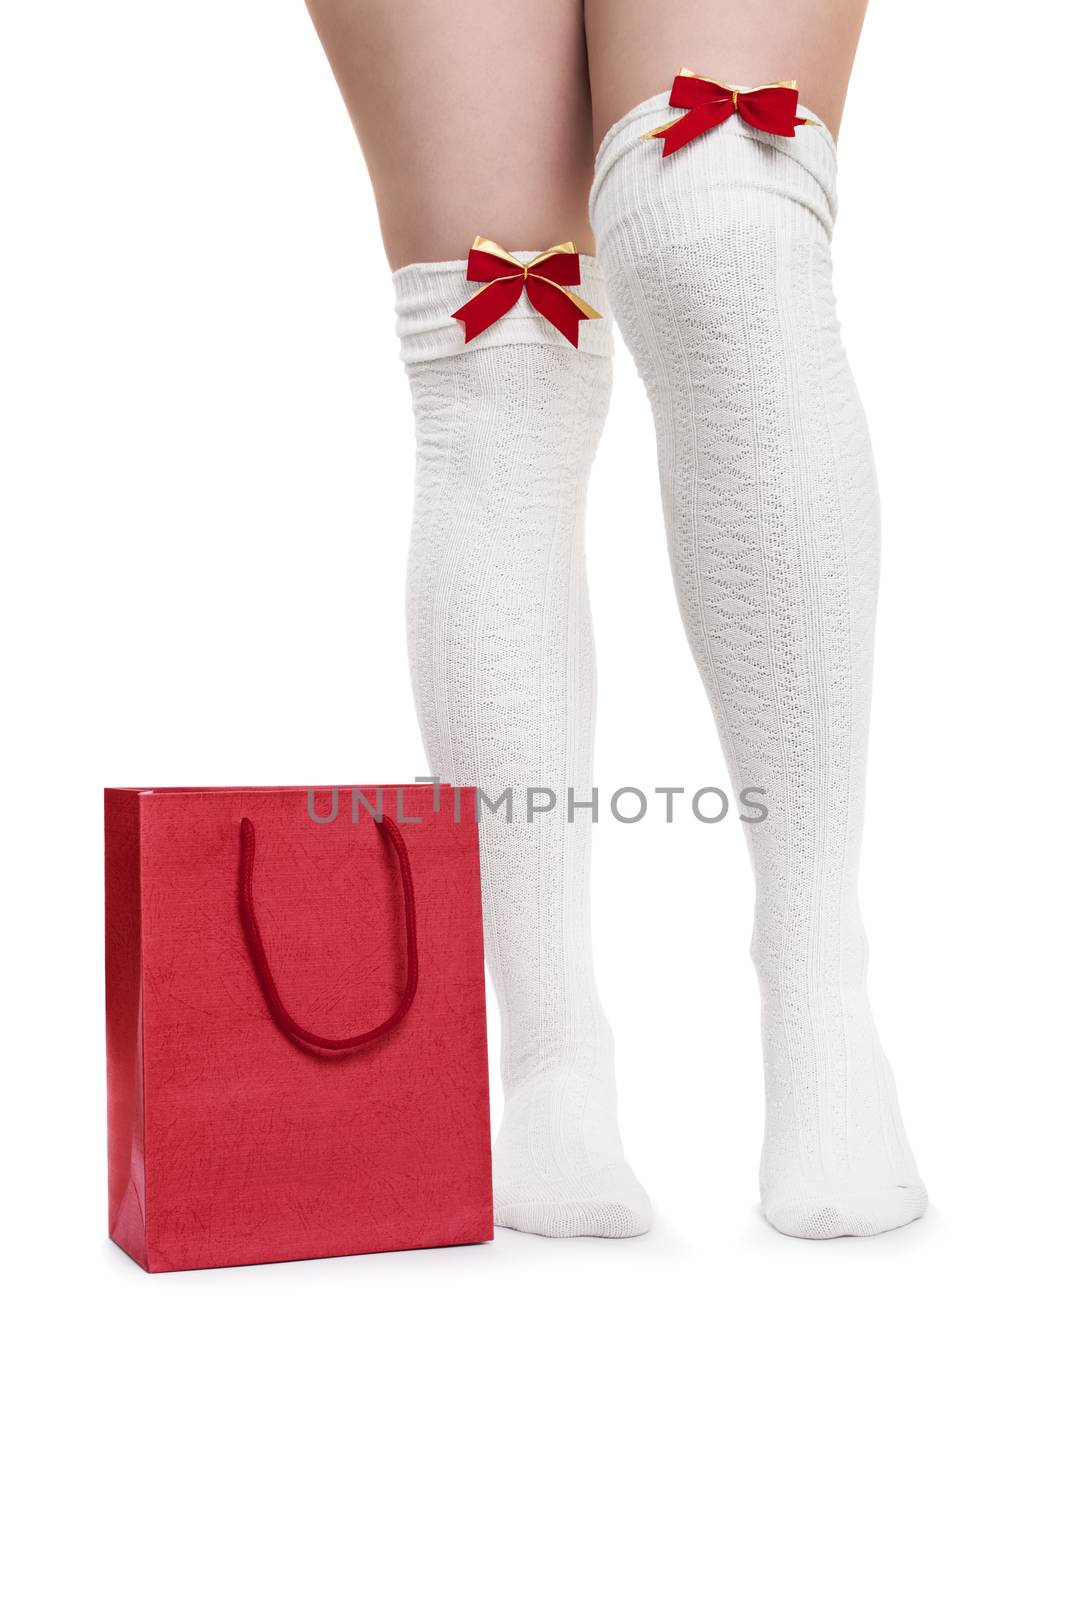 Christmas or Valentine’s Concept. Female legs in white knee high stockings with red bow ties standing next to a red gift bag or shopping bag, isolated on white background. Christmas shopping concept.